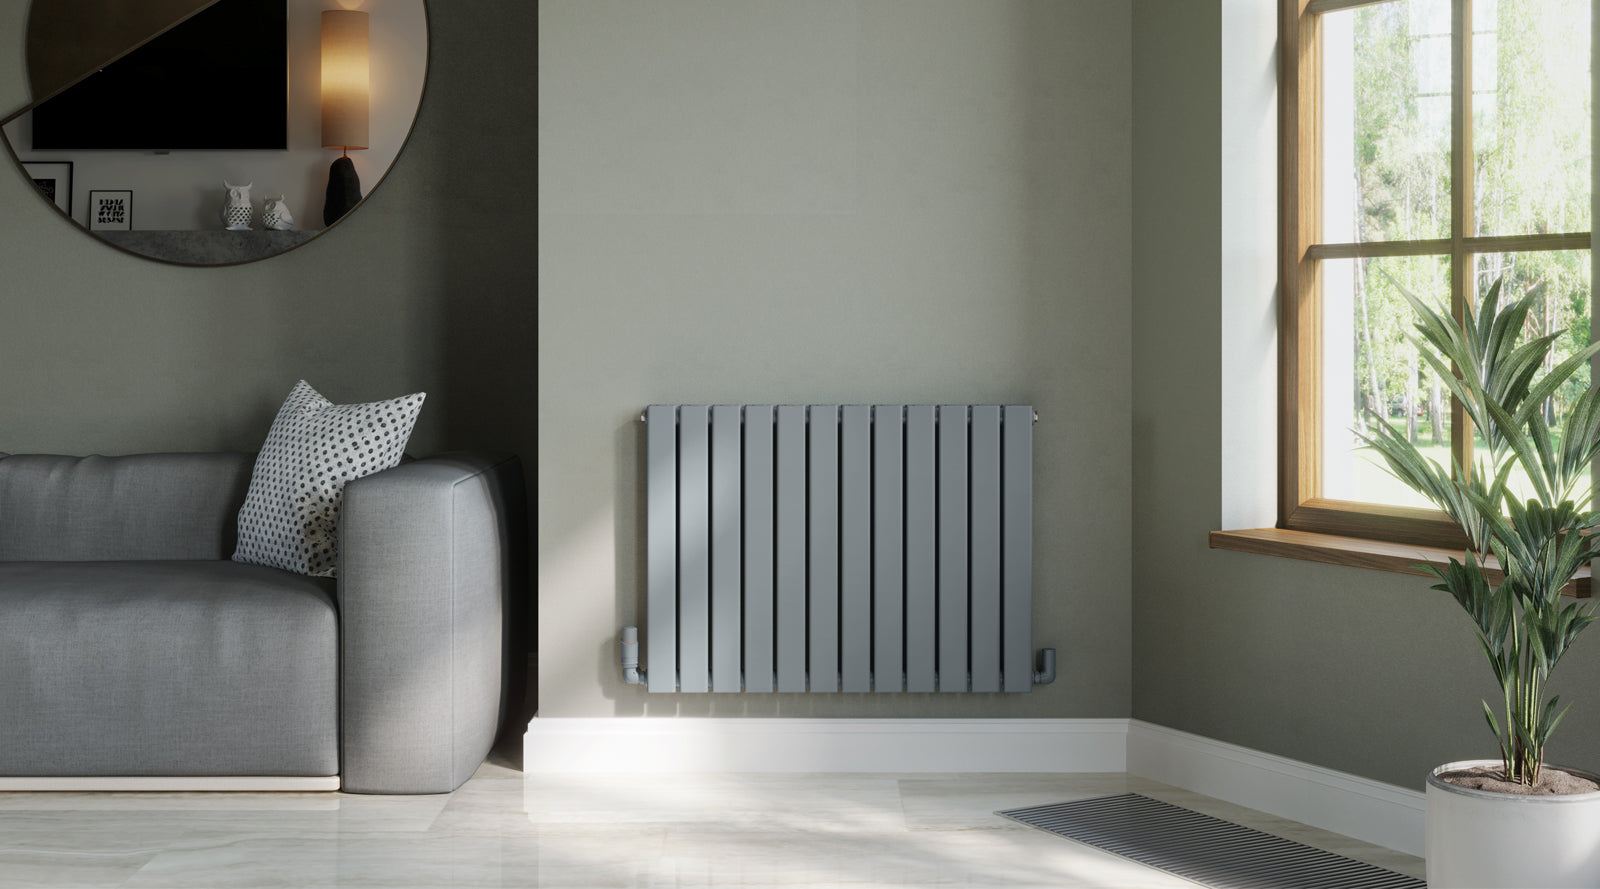 BTU Calculator and Picking the Right Size Radiator/Towel Rail